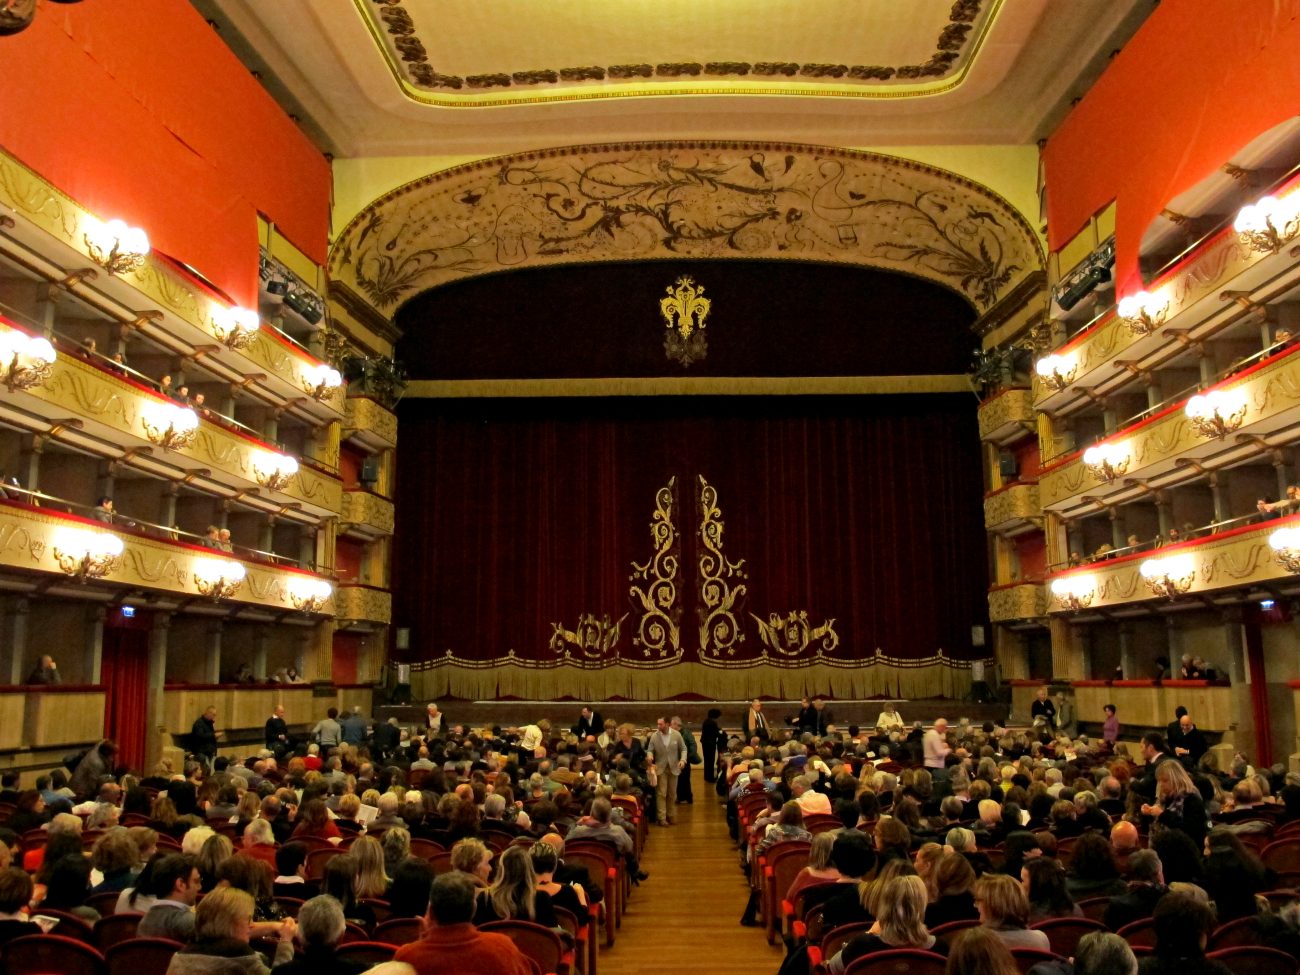 The Verdi Theater in Florence